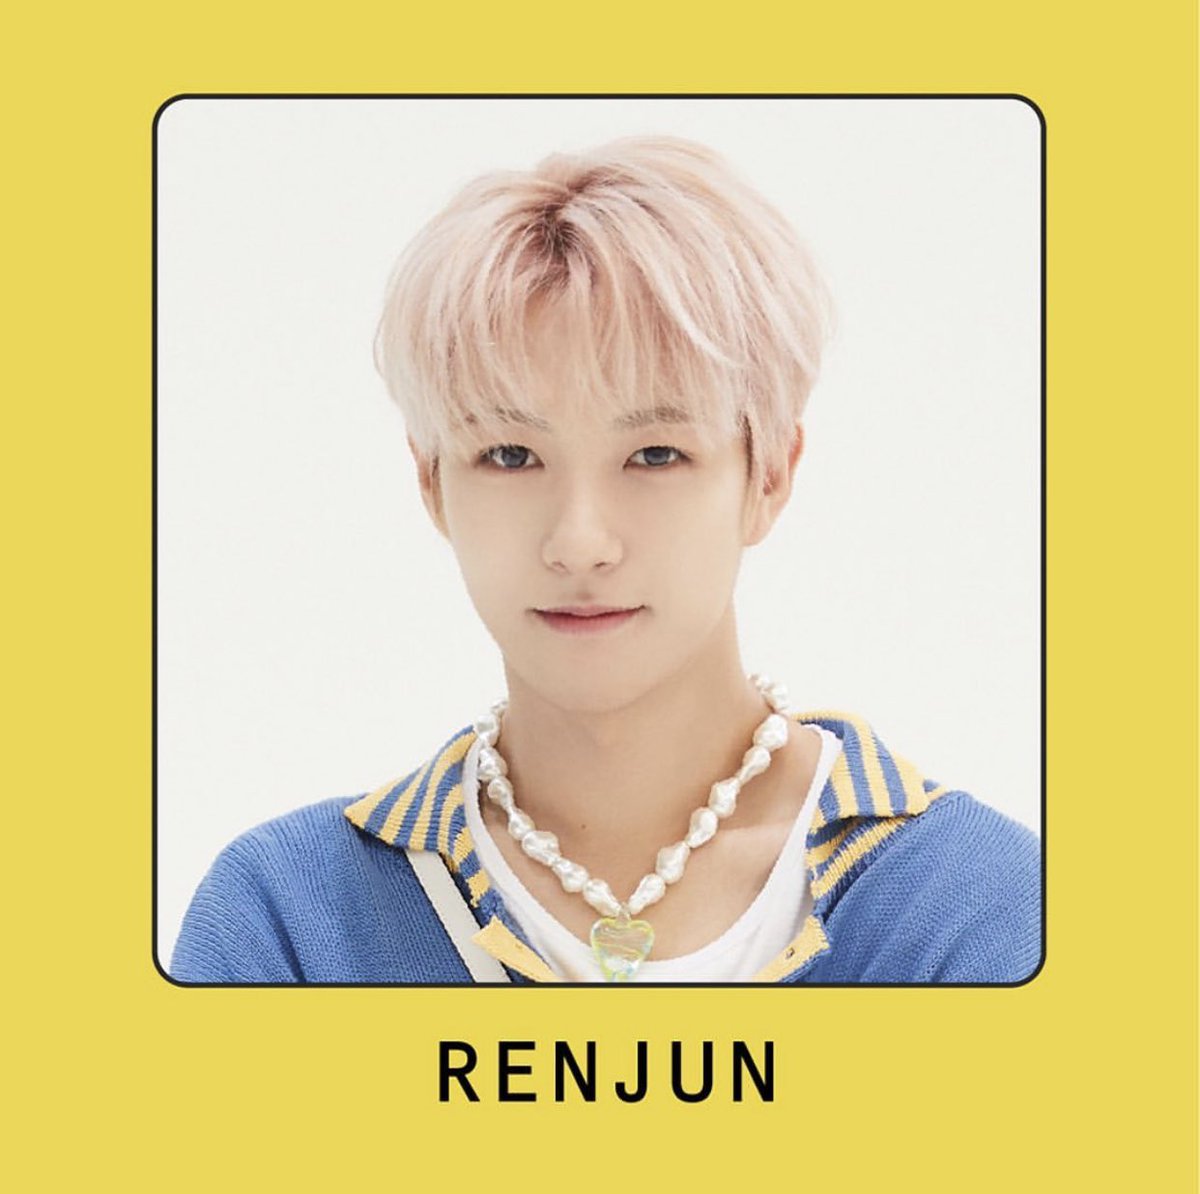 renjun (런쥔)full name: huang renjun (黄仁俊）birthday: march 23, 2000 (aries)birthplace: jilin, chinaposition: main vocalist, lead dancerheight: 171 cm (5’7”)trainee since: 2015 (10 months)units: nct dream, nct ustans: injeolmi